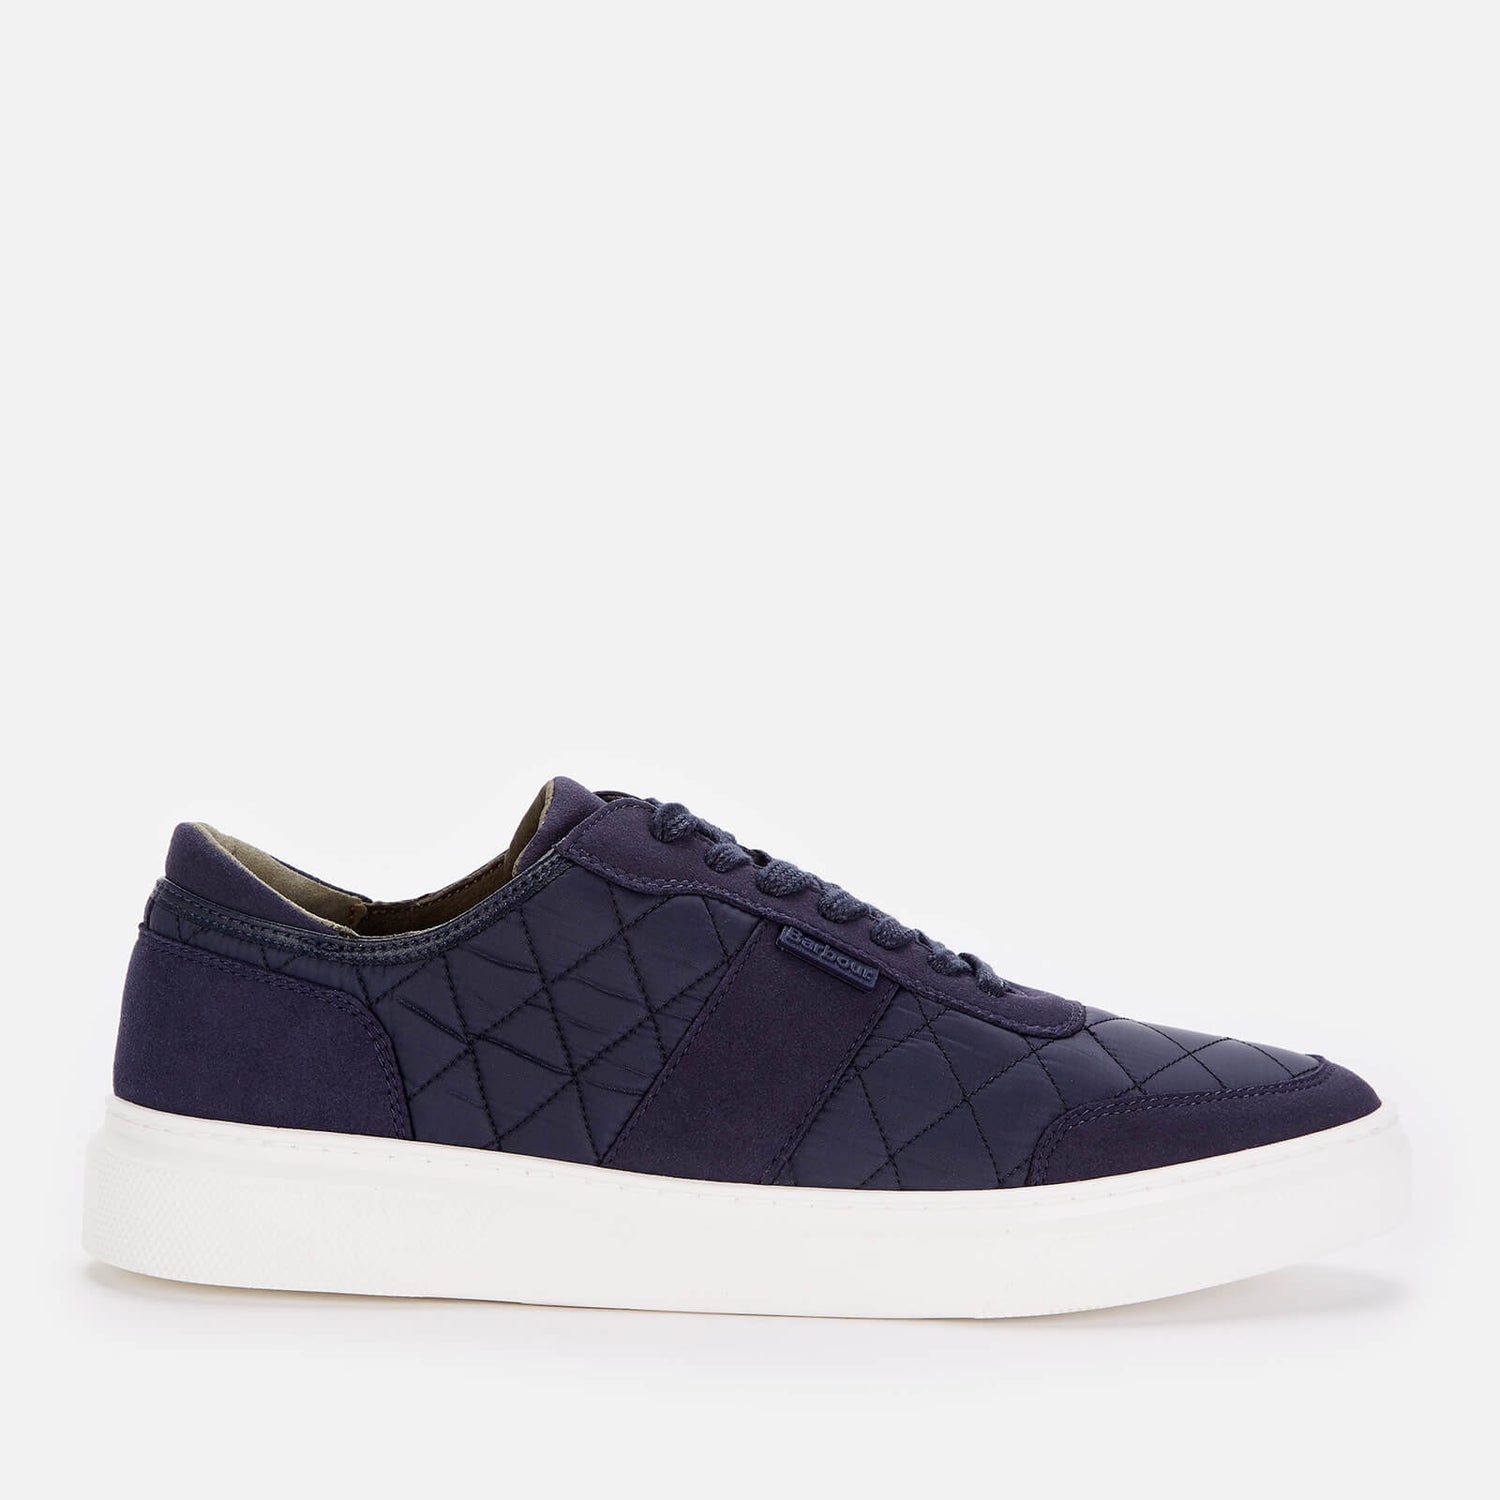 Barbour Men's Liddesdale Quilted Low Top Trainers - Navy